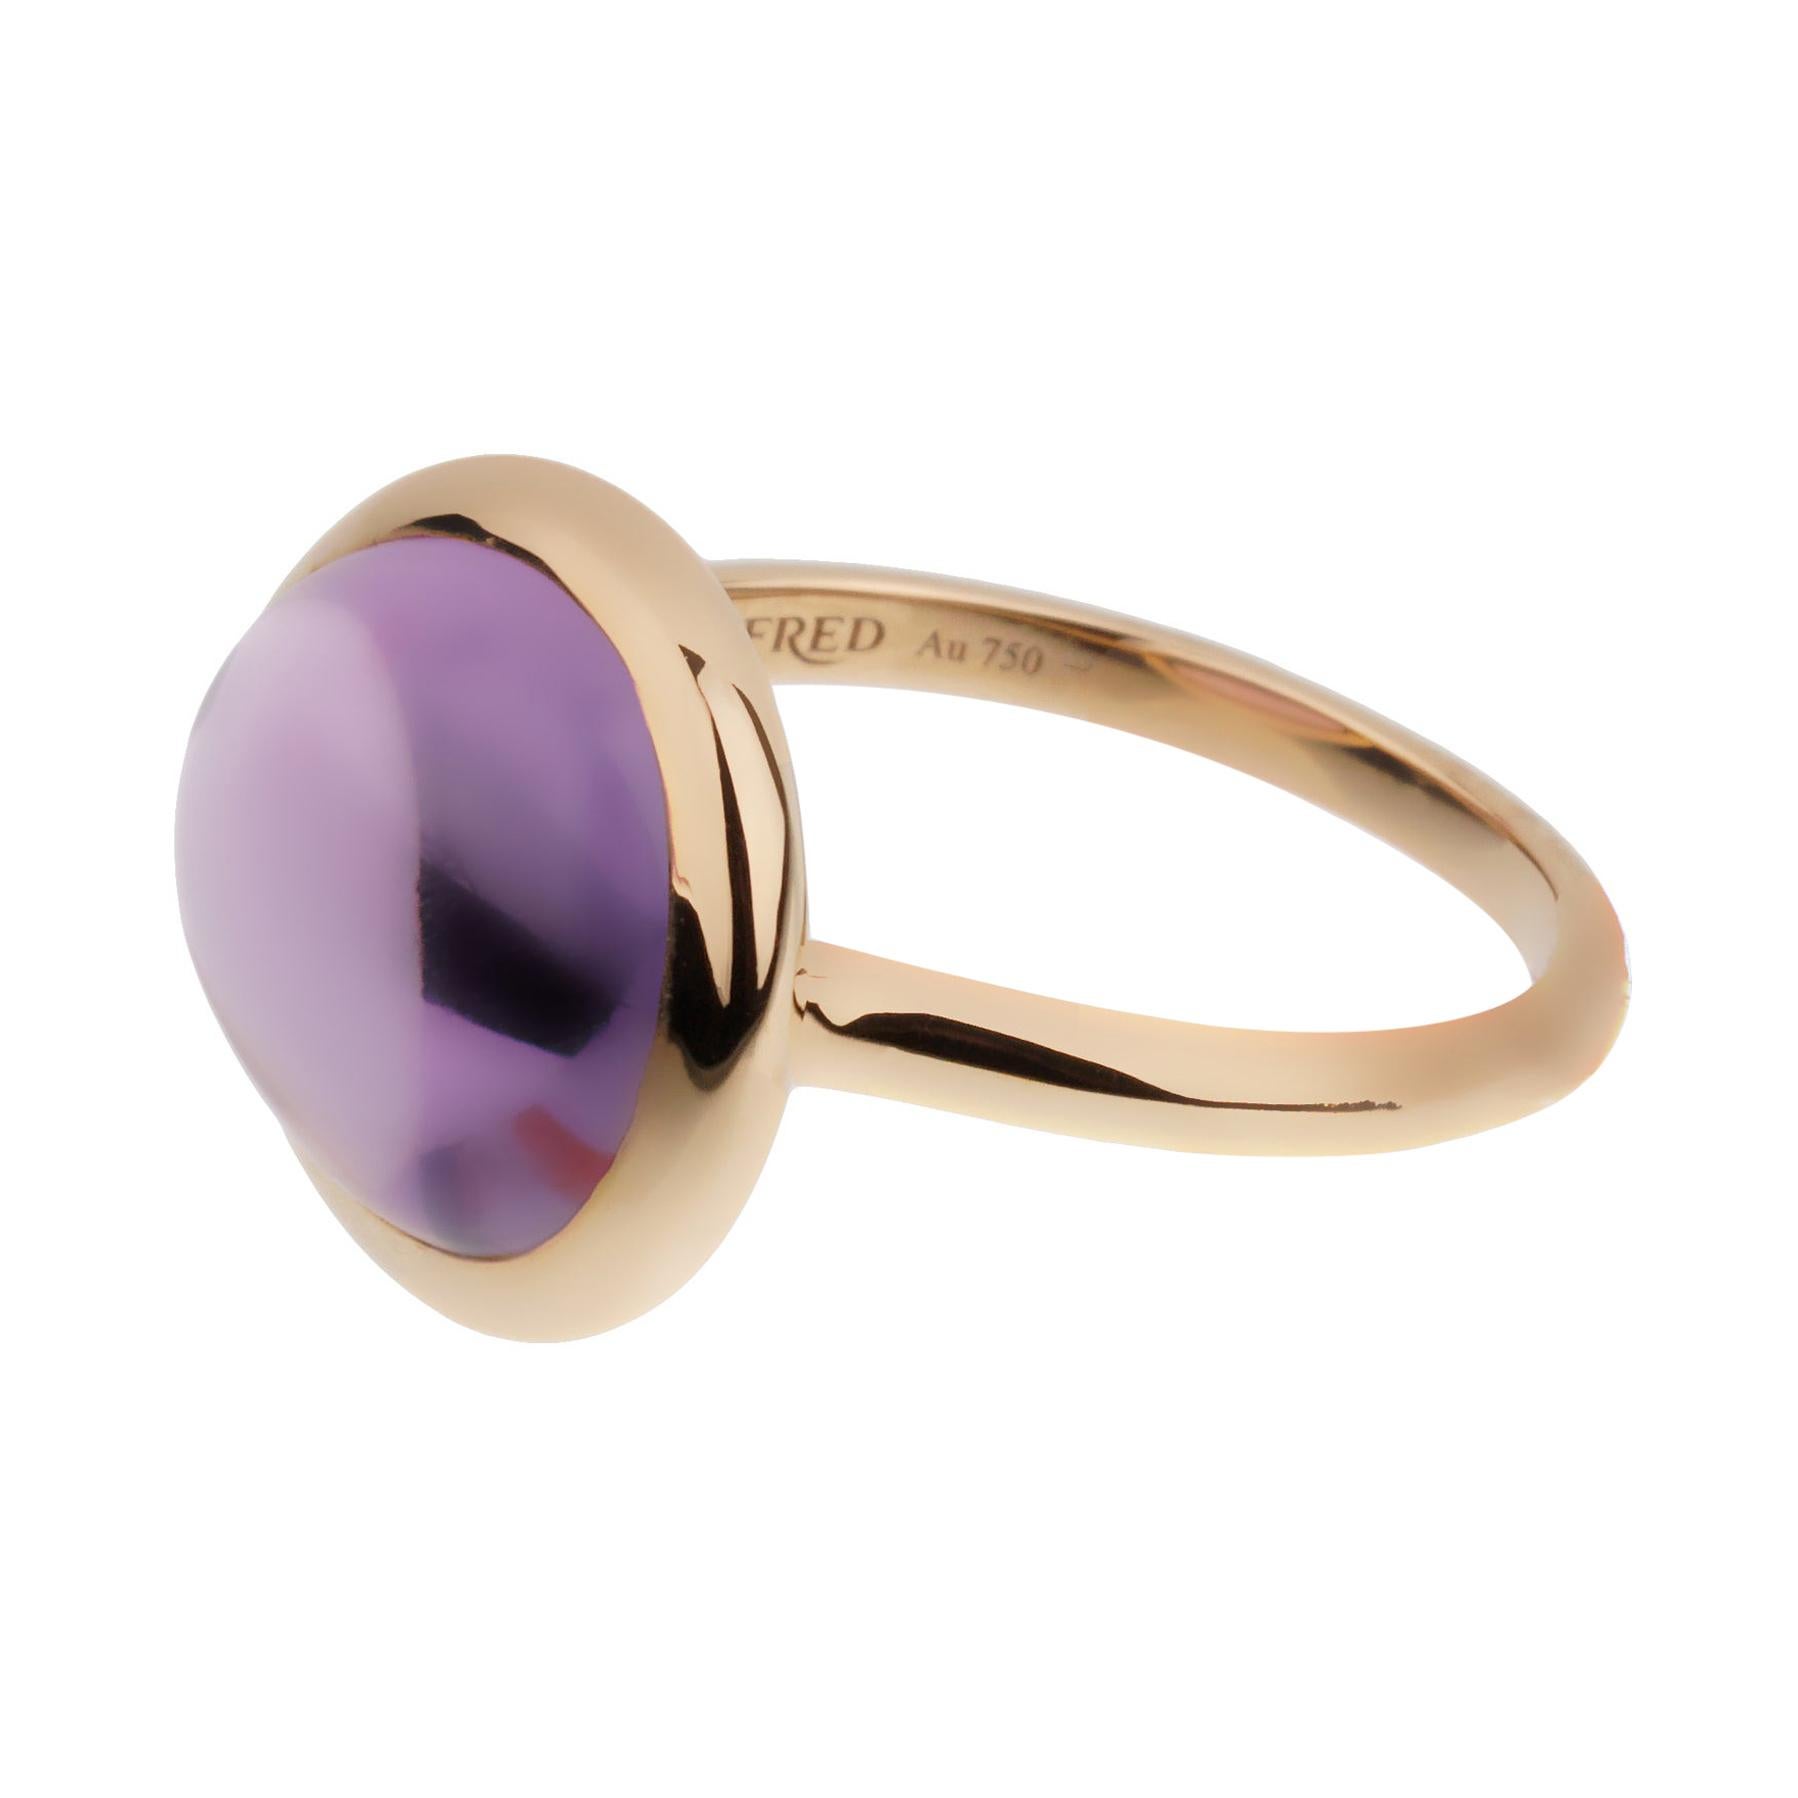 A chic Fred of Paris rose gold cocktail ring showcasing a 7ct cabochon Amethyst set in 18k gold. The ring measures a size 7 1/2 and can be resized if needed.